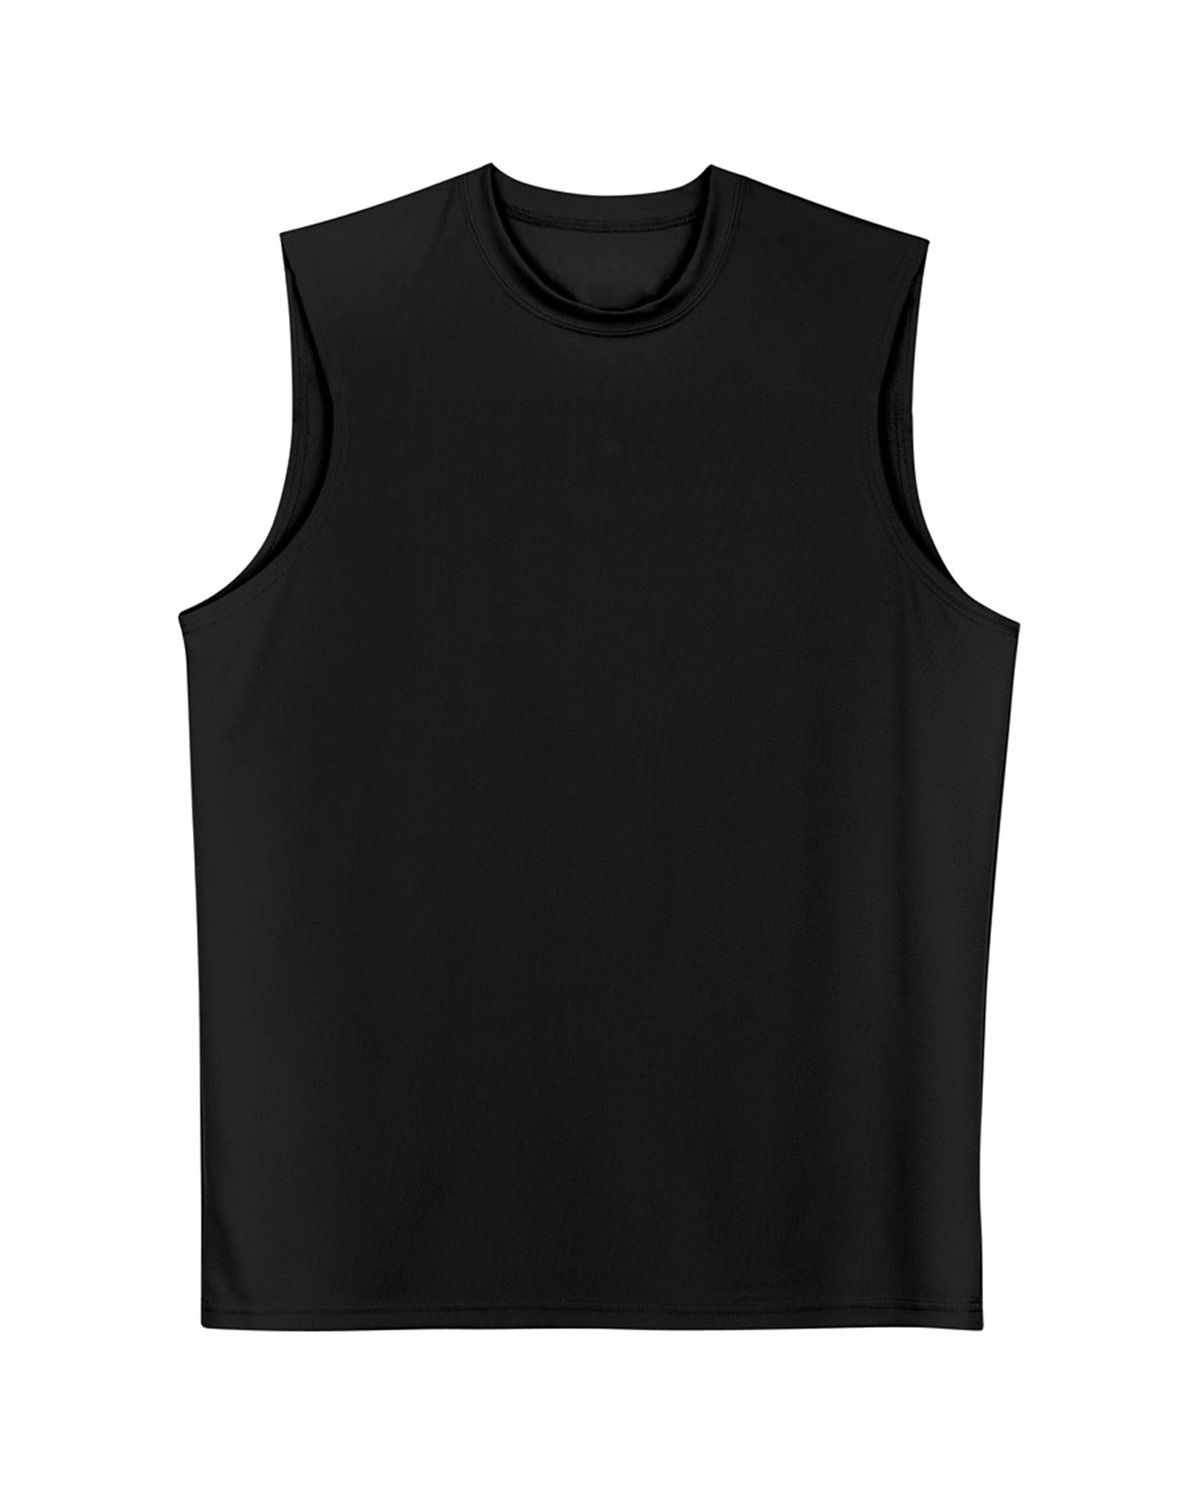 A4 N2295 - Adult Cooling Performance Muscle Tee